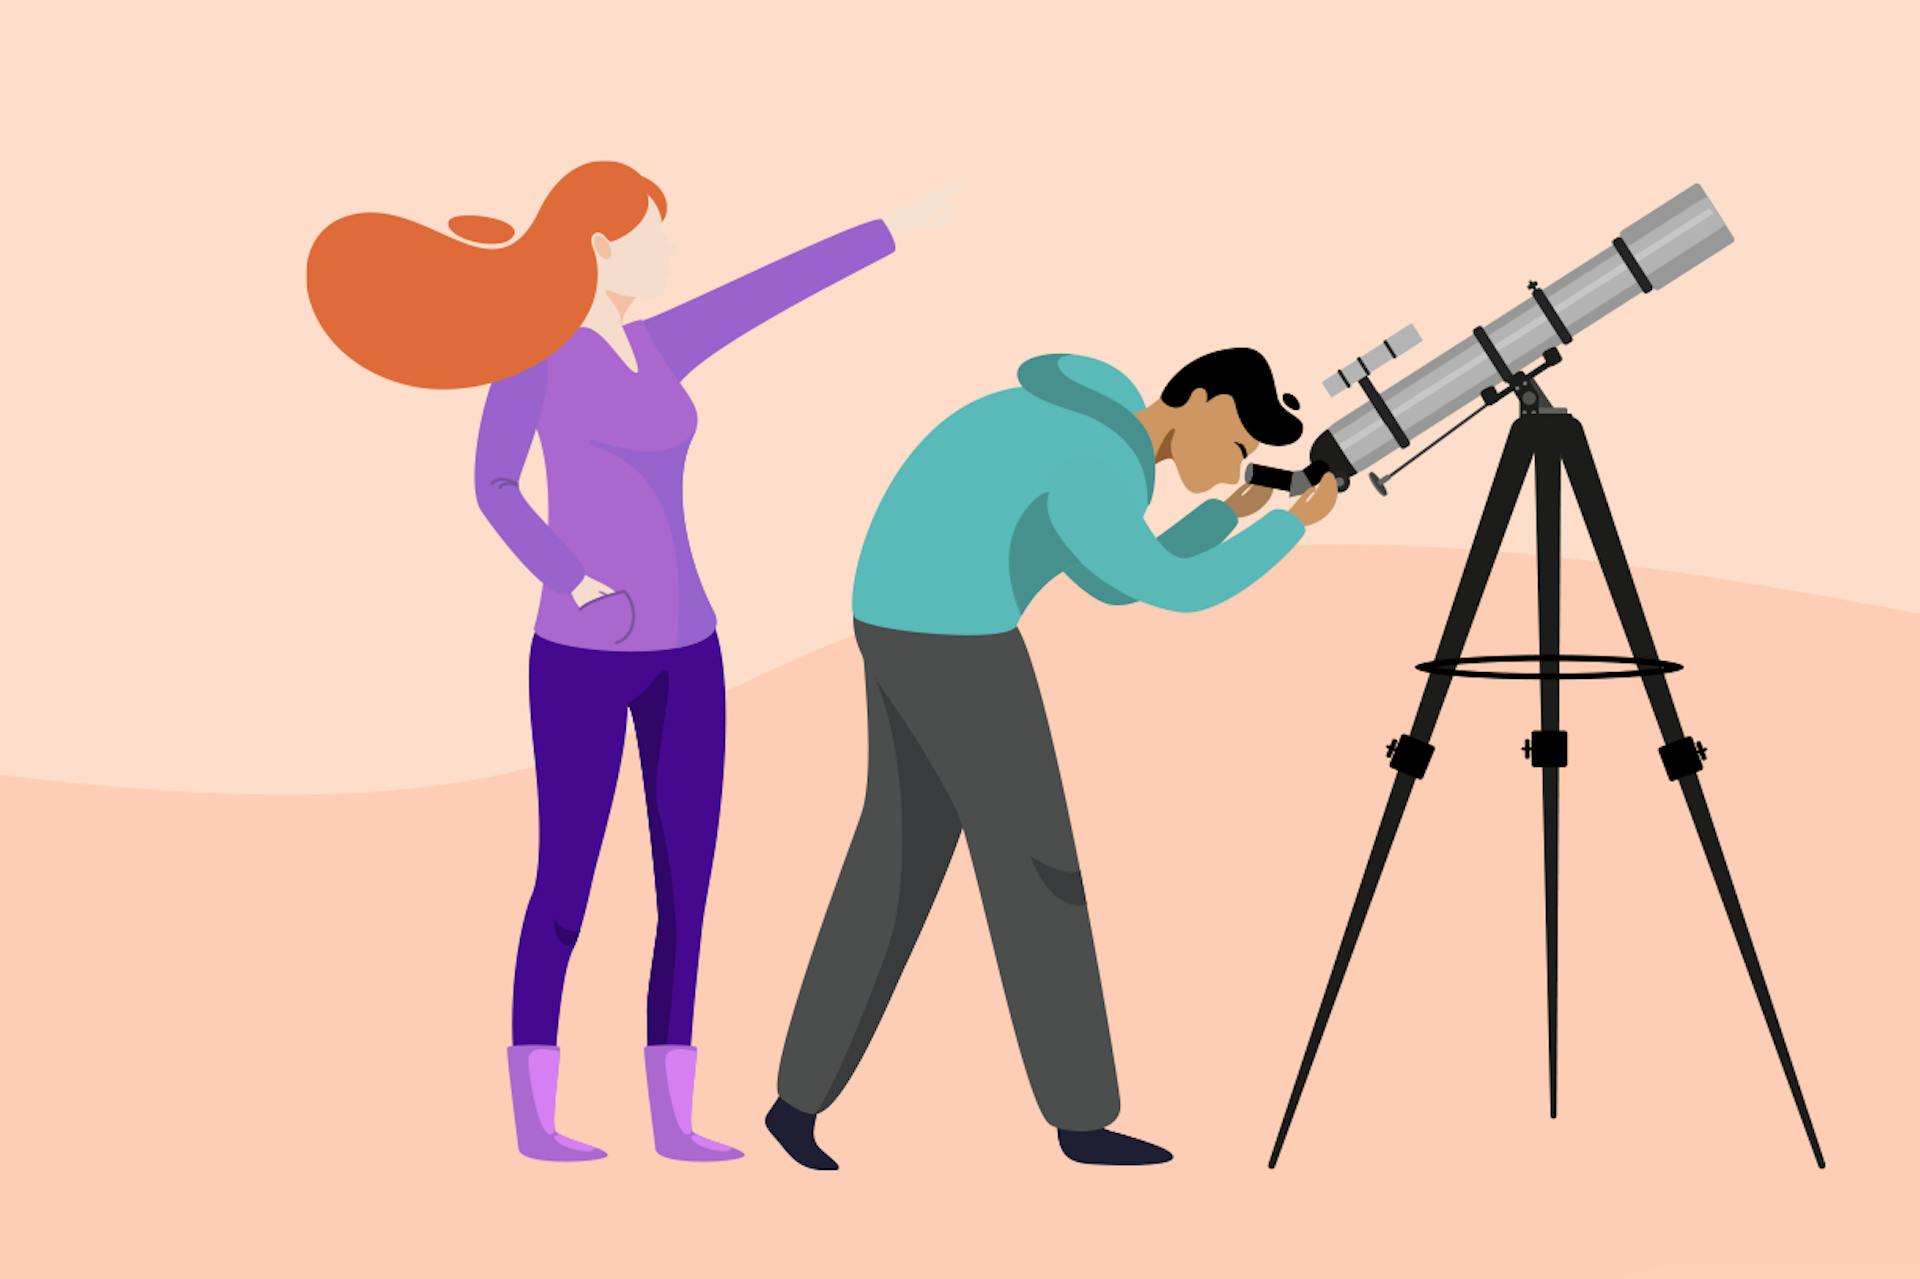 Illustration showing two people behind a telescope. Oktopost alternatives blog post.